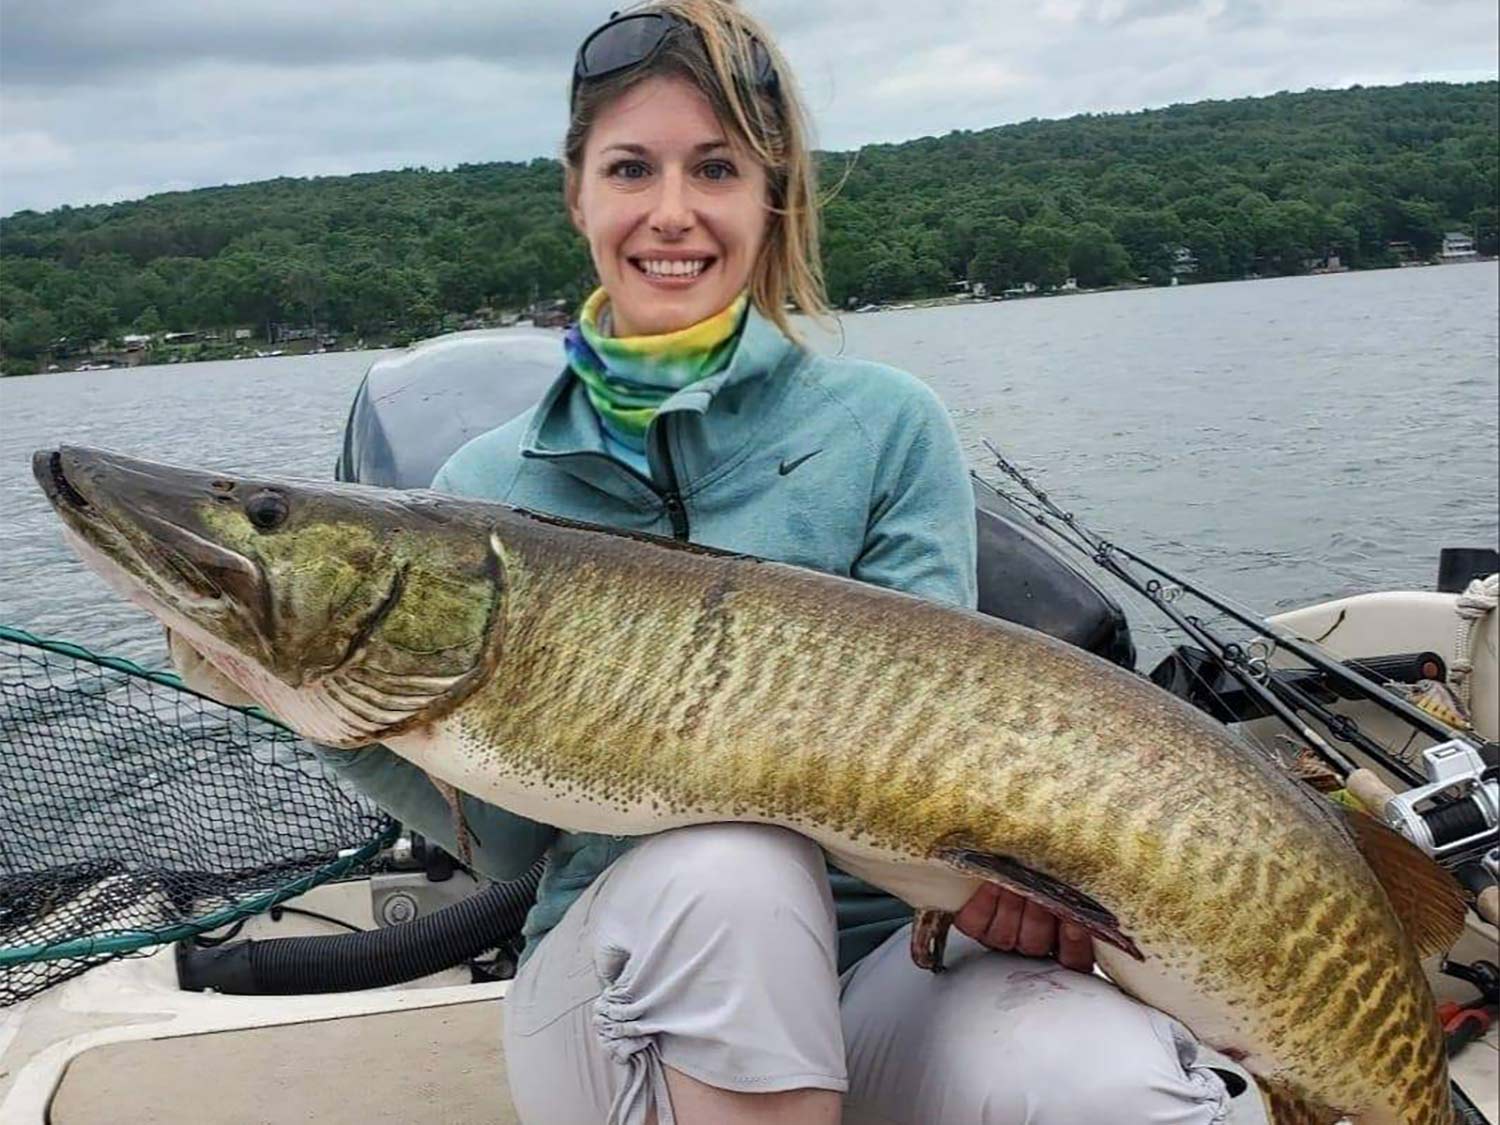 Two New York Anglers Catch 81 Muskies In One Season